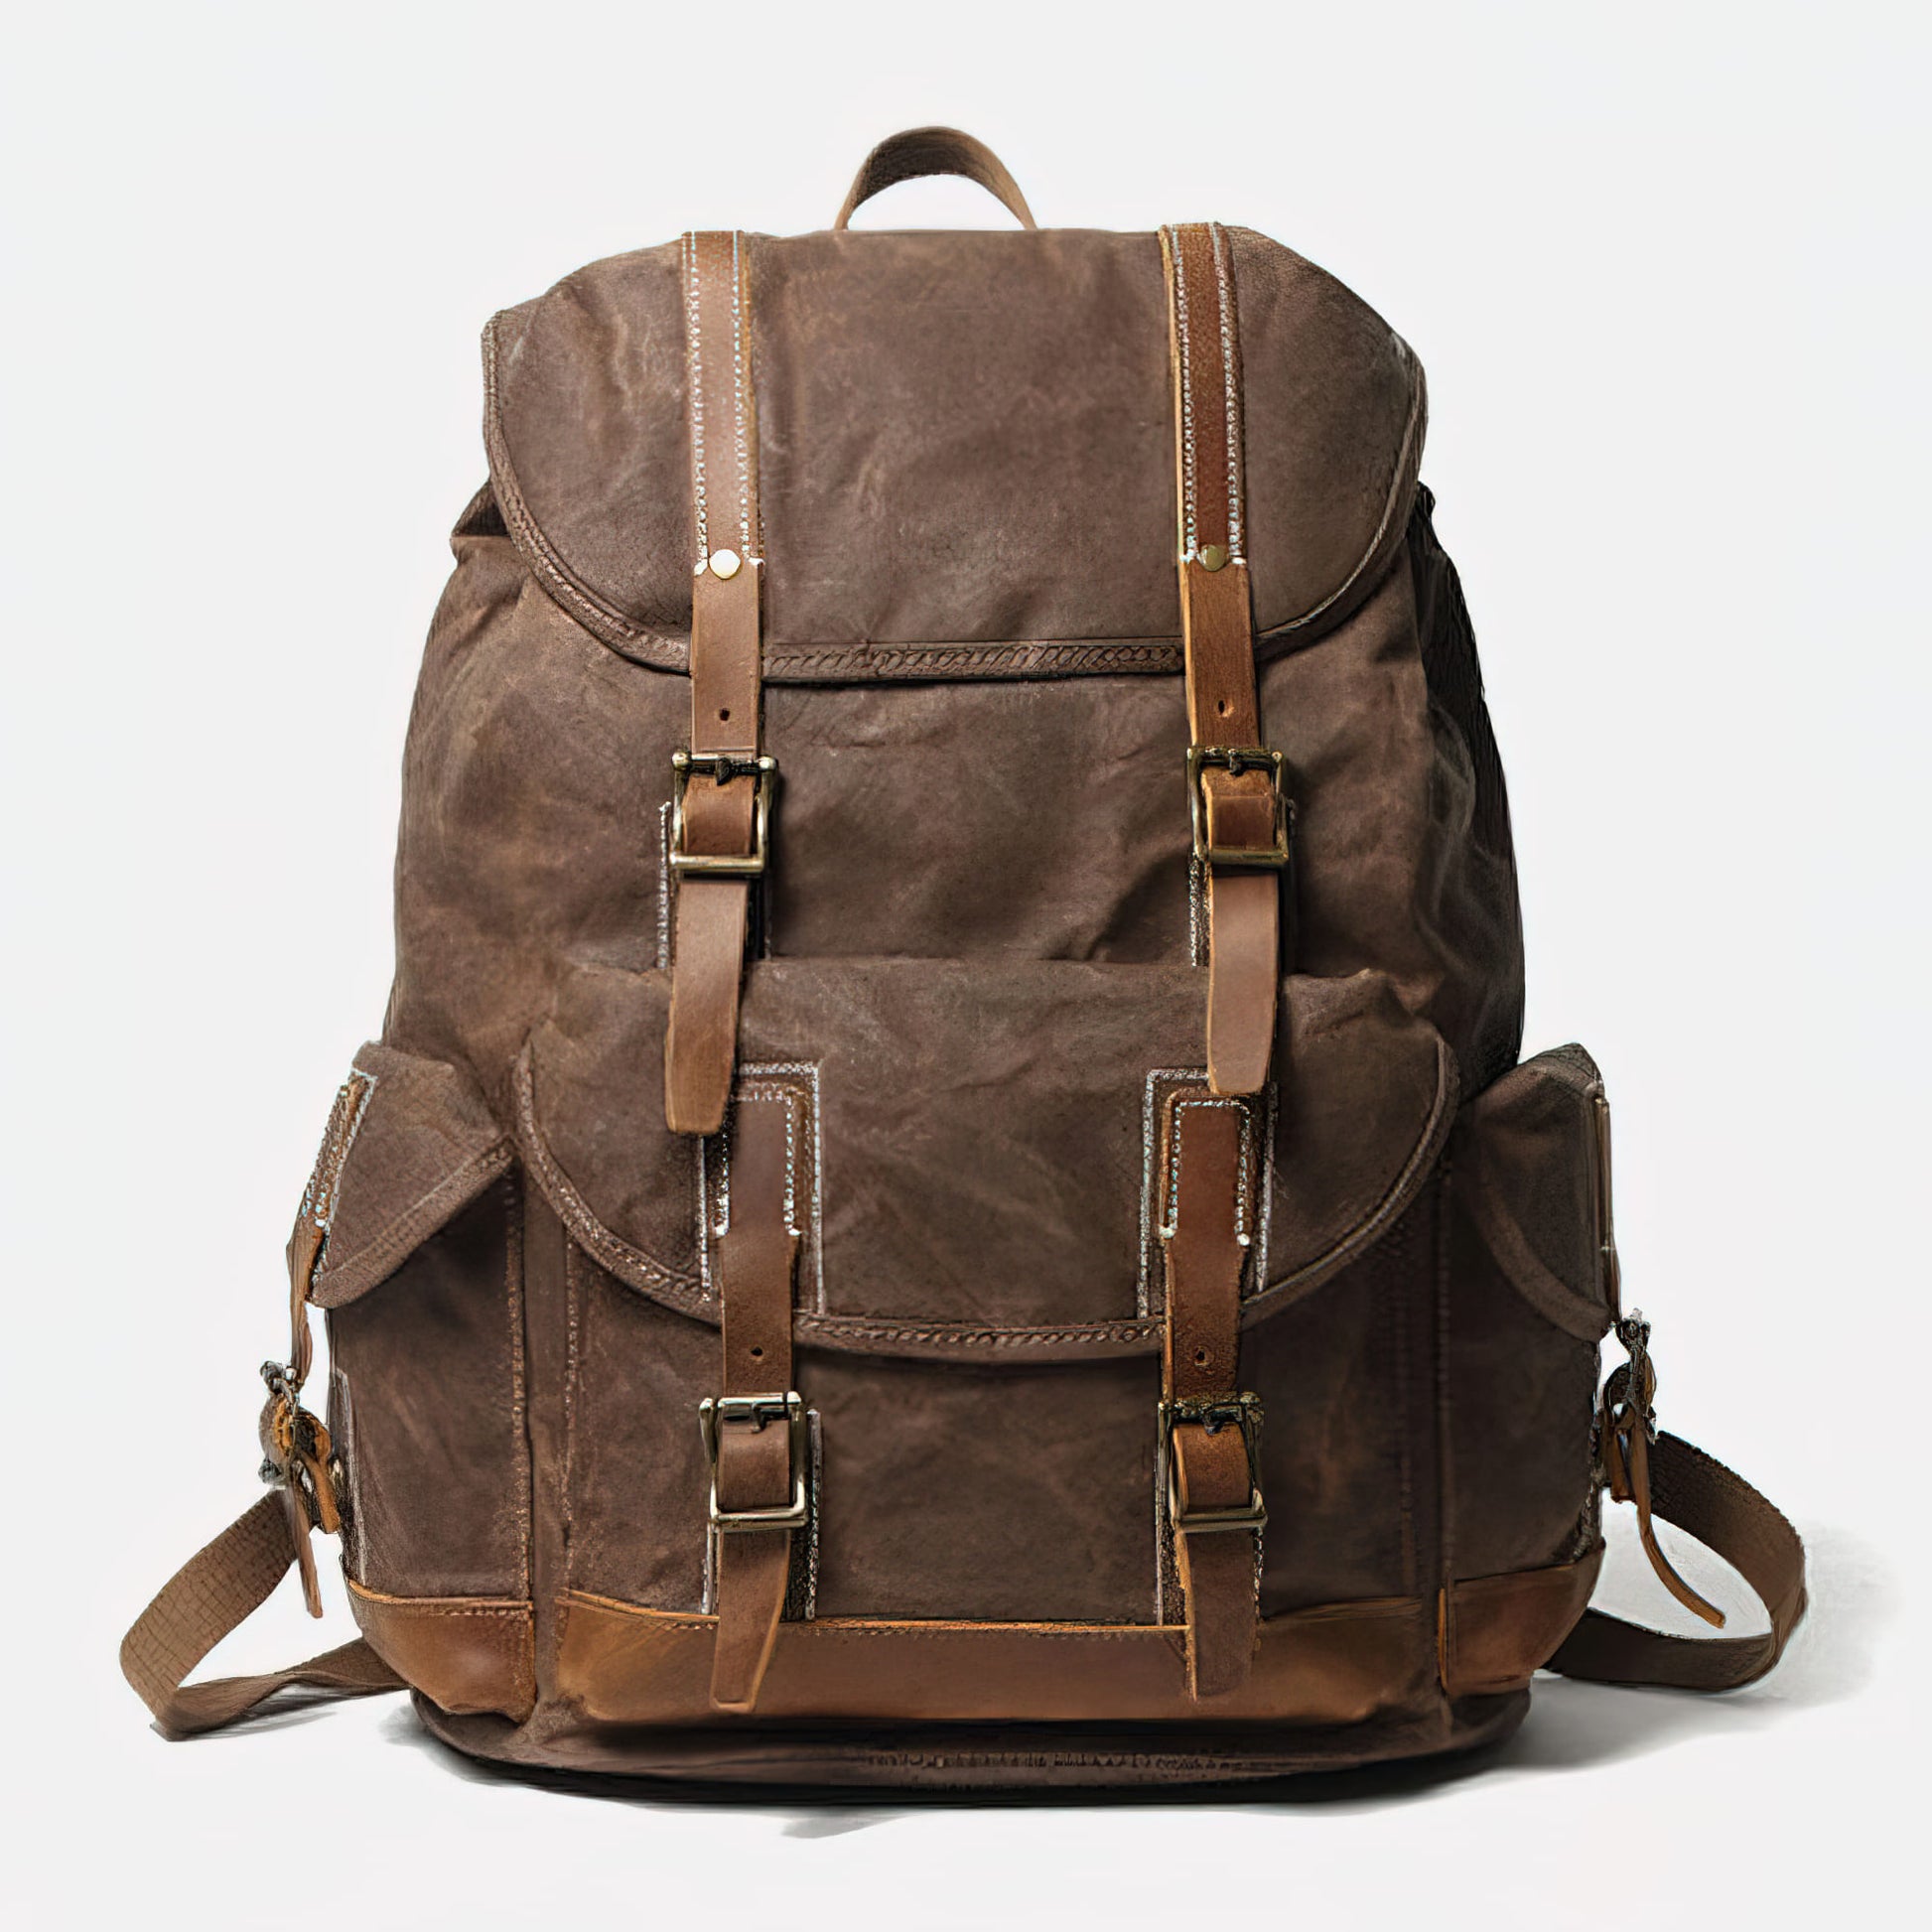 Waxed Canvas Backpack Rucksack 30L - Large Capacity, Genuine